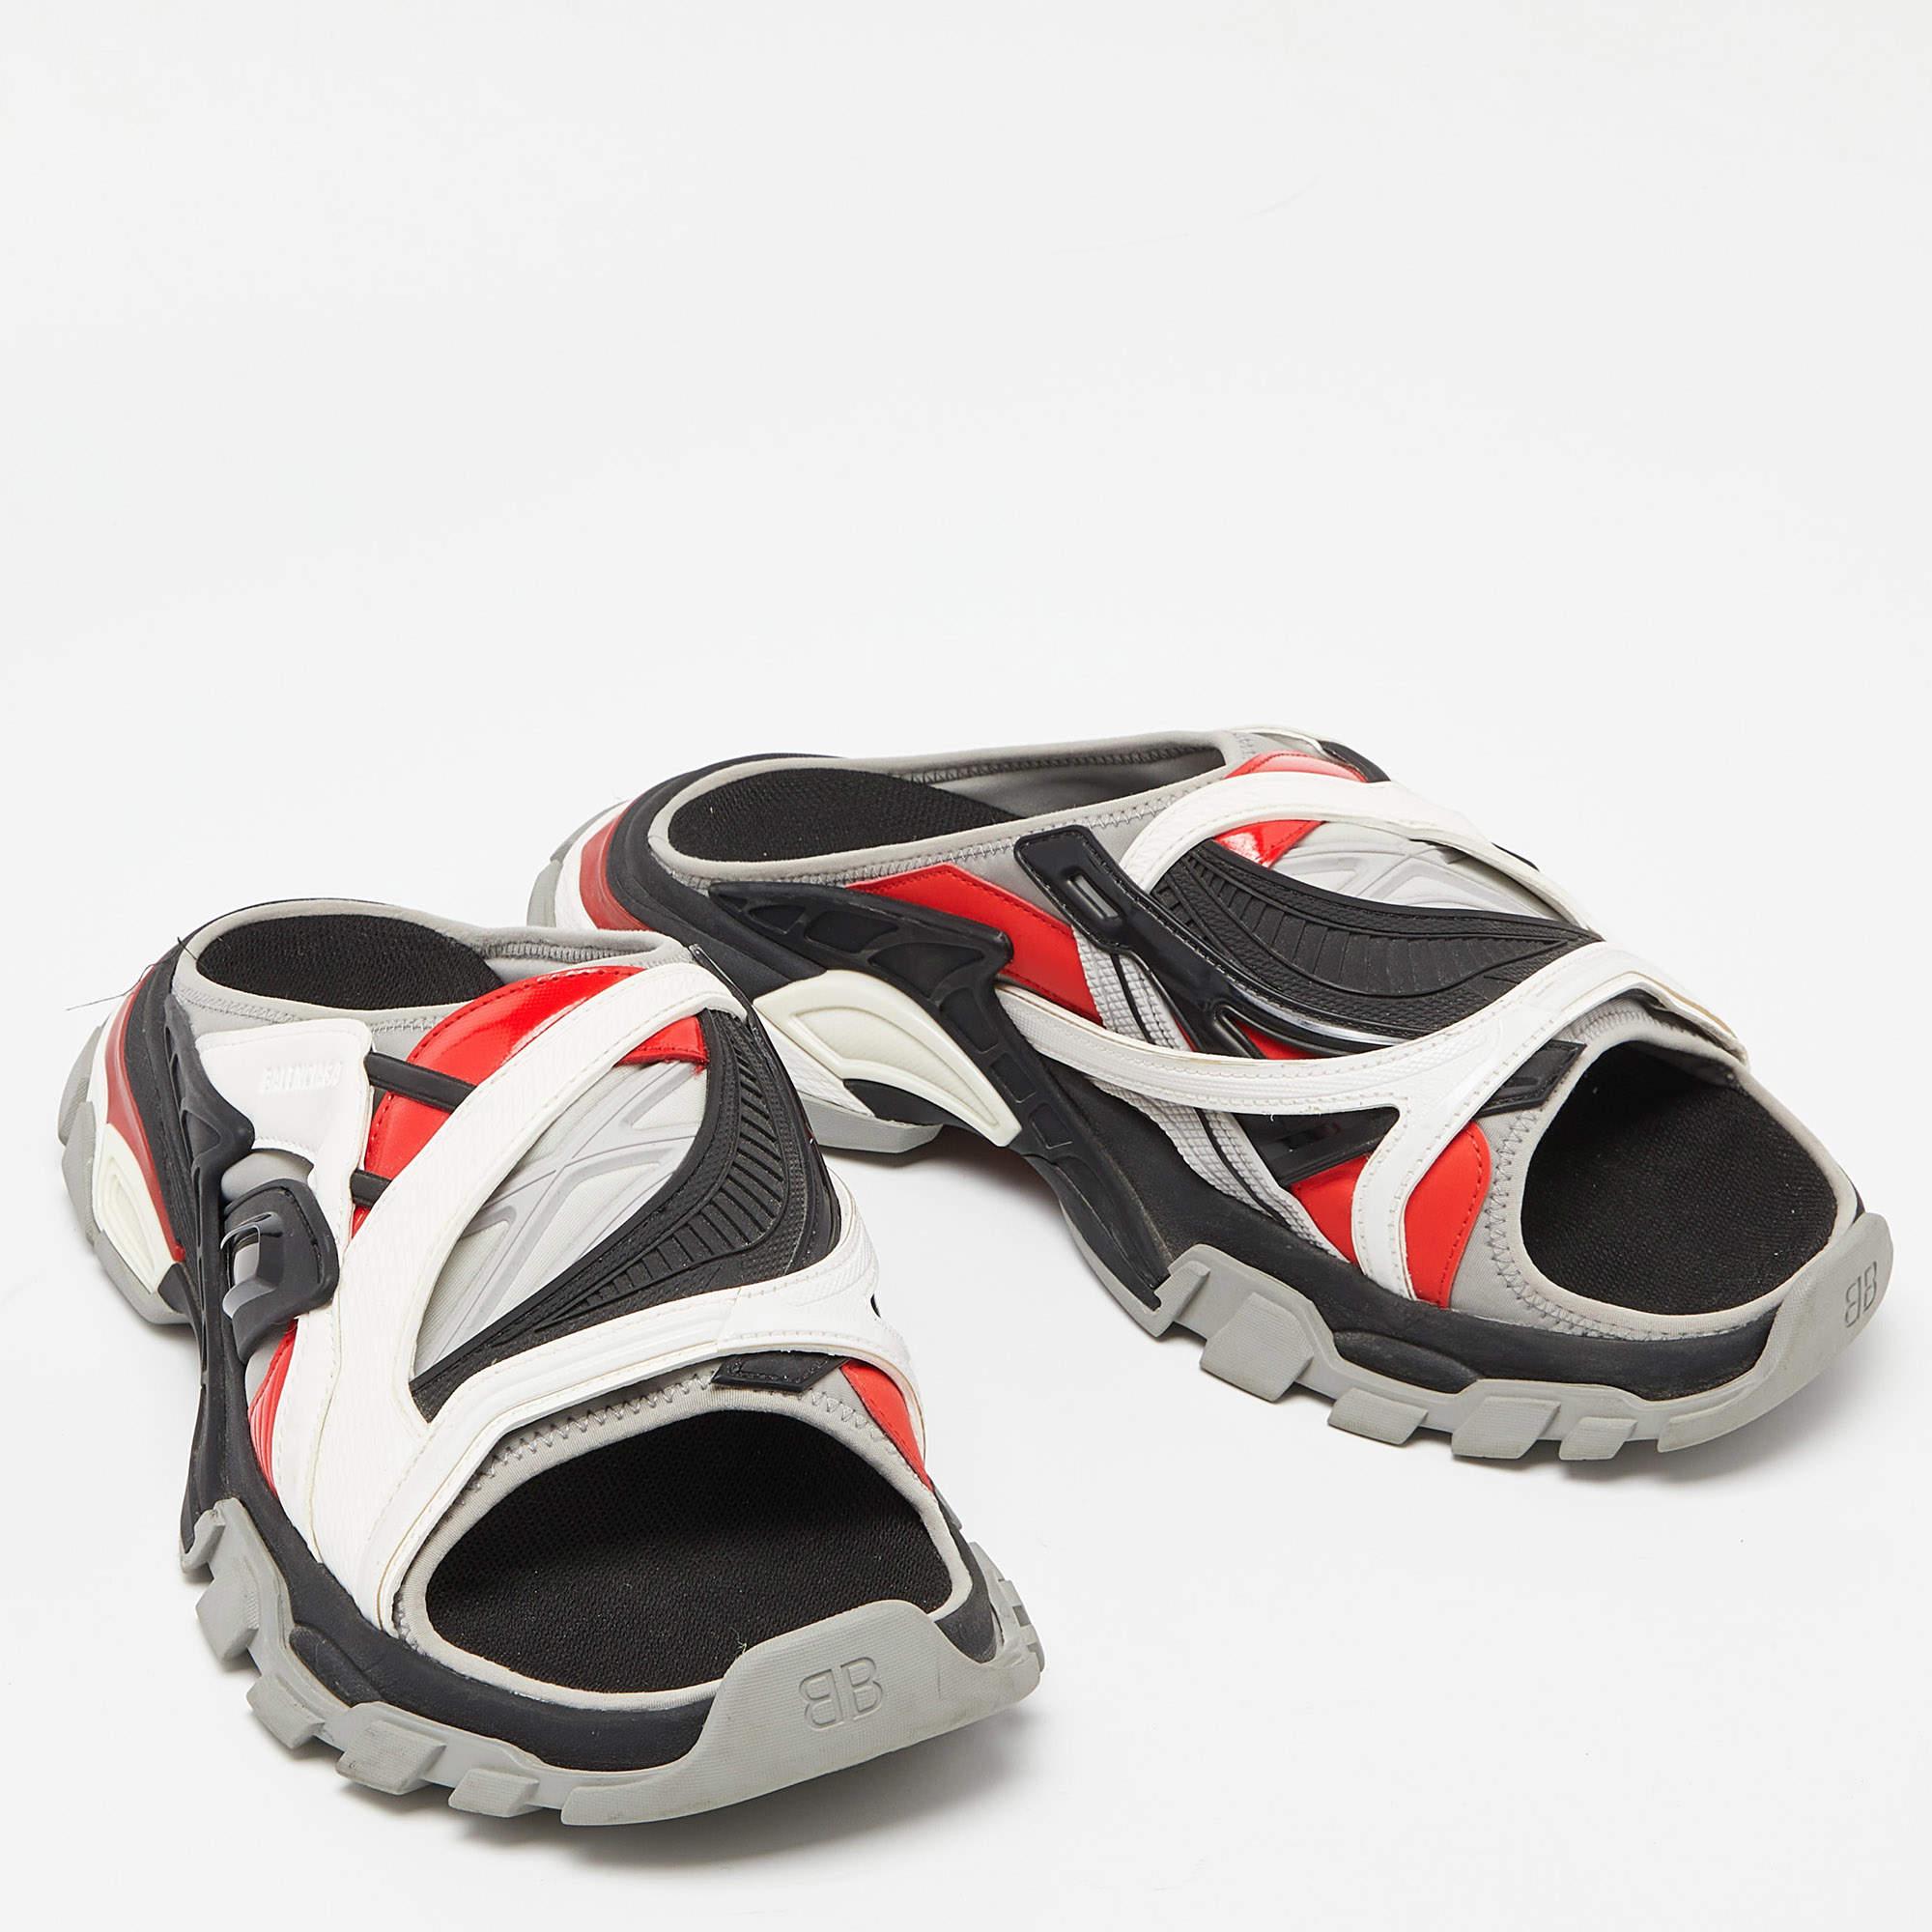 Balenciaga Tricolor Rubber and Leather Track Slides Size 45 1